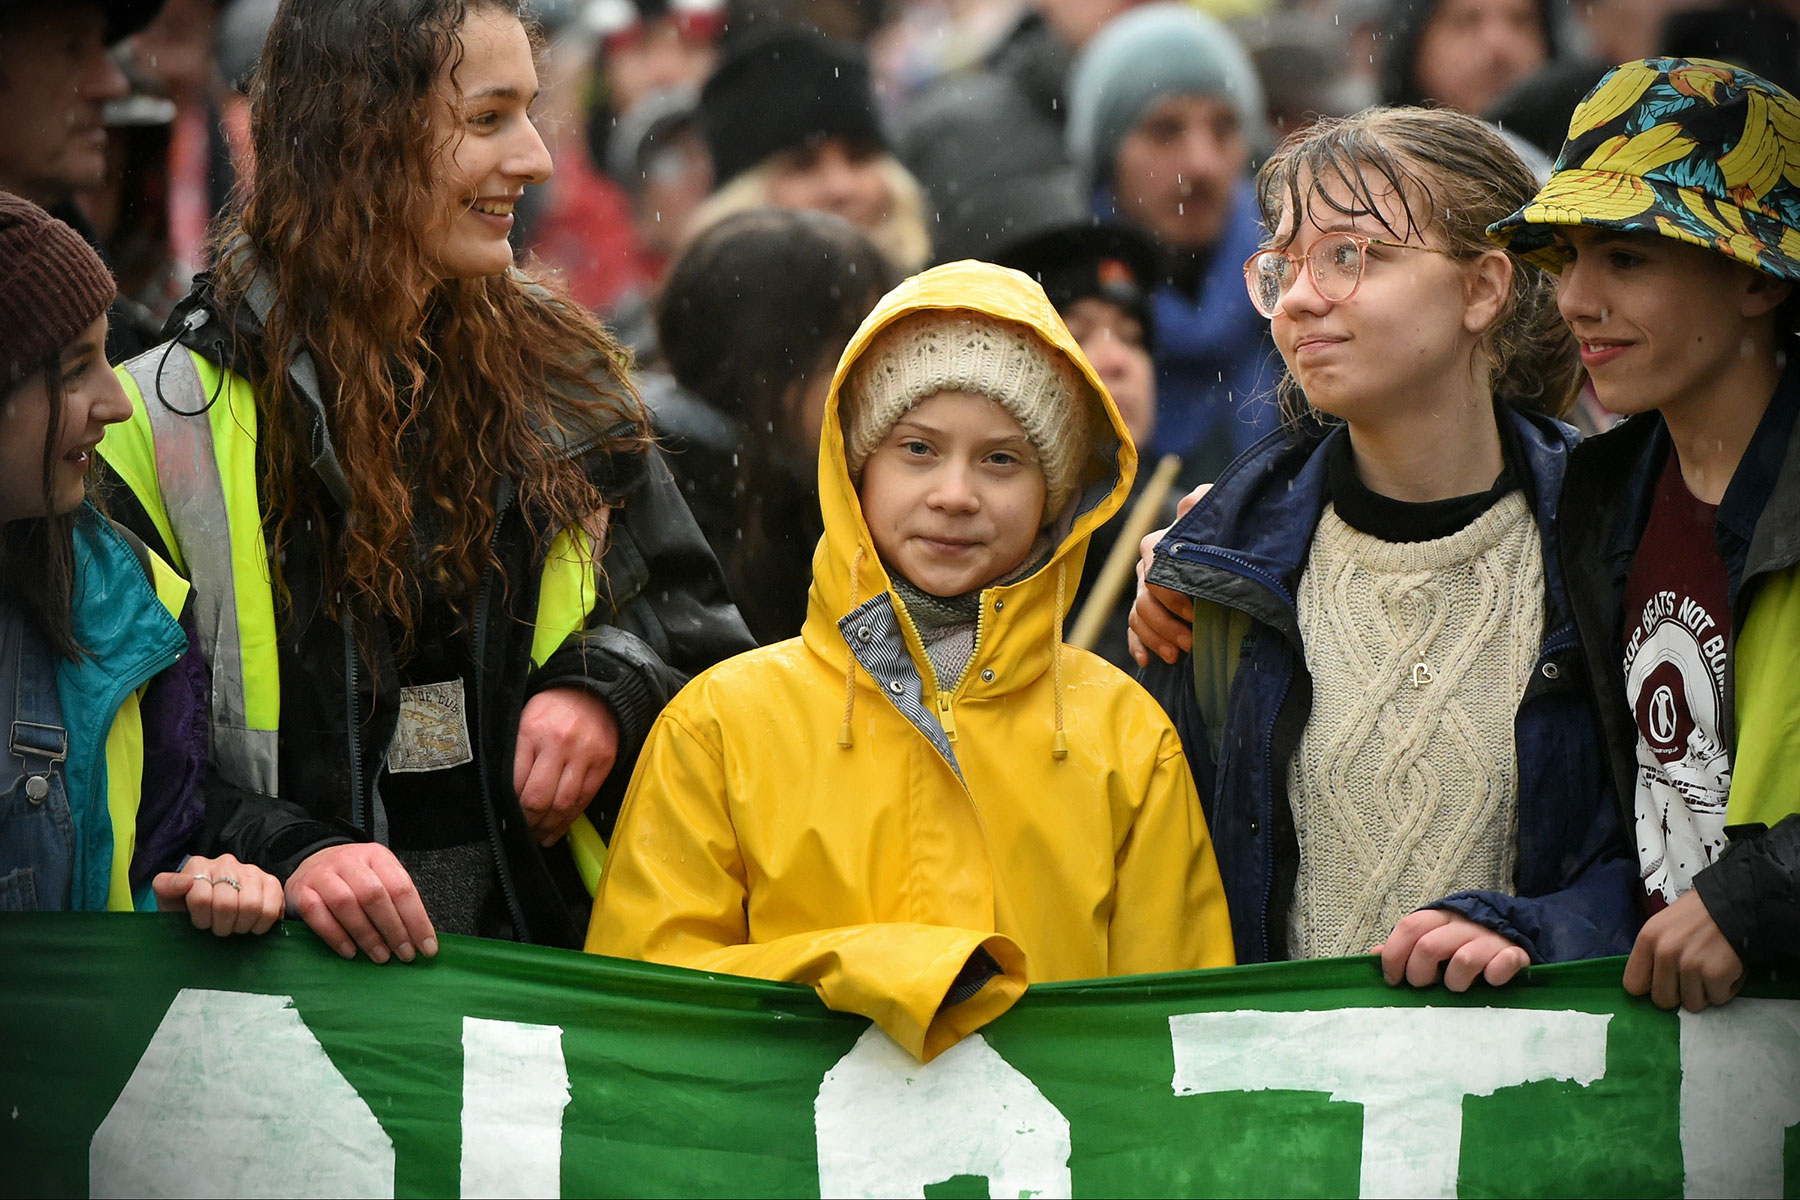 Greta Thunberg, Greta Thunberg news, climate change, climate change news, global warming, COP26, Conference of the Parties, United Nations Framework Convention of Climate Change, UNFCCC, Arek Sinanian